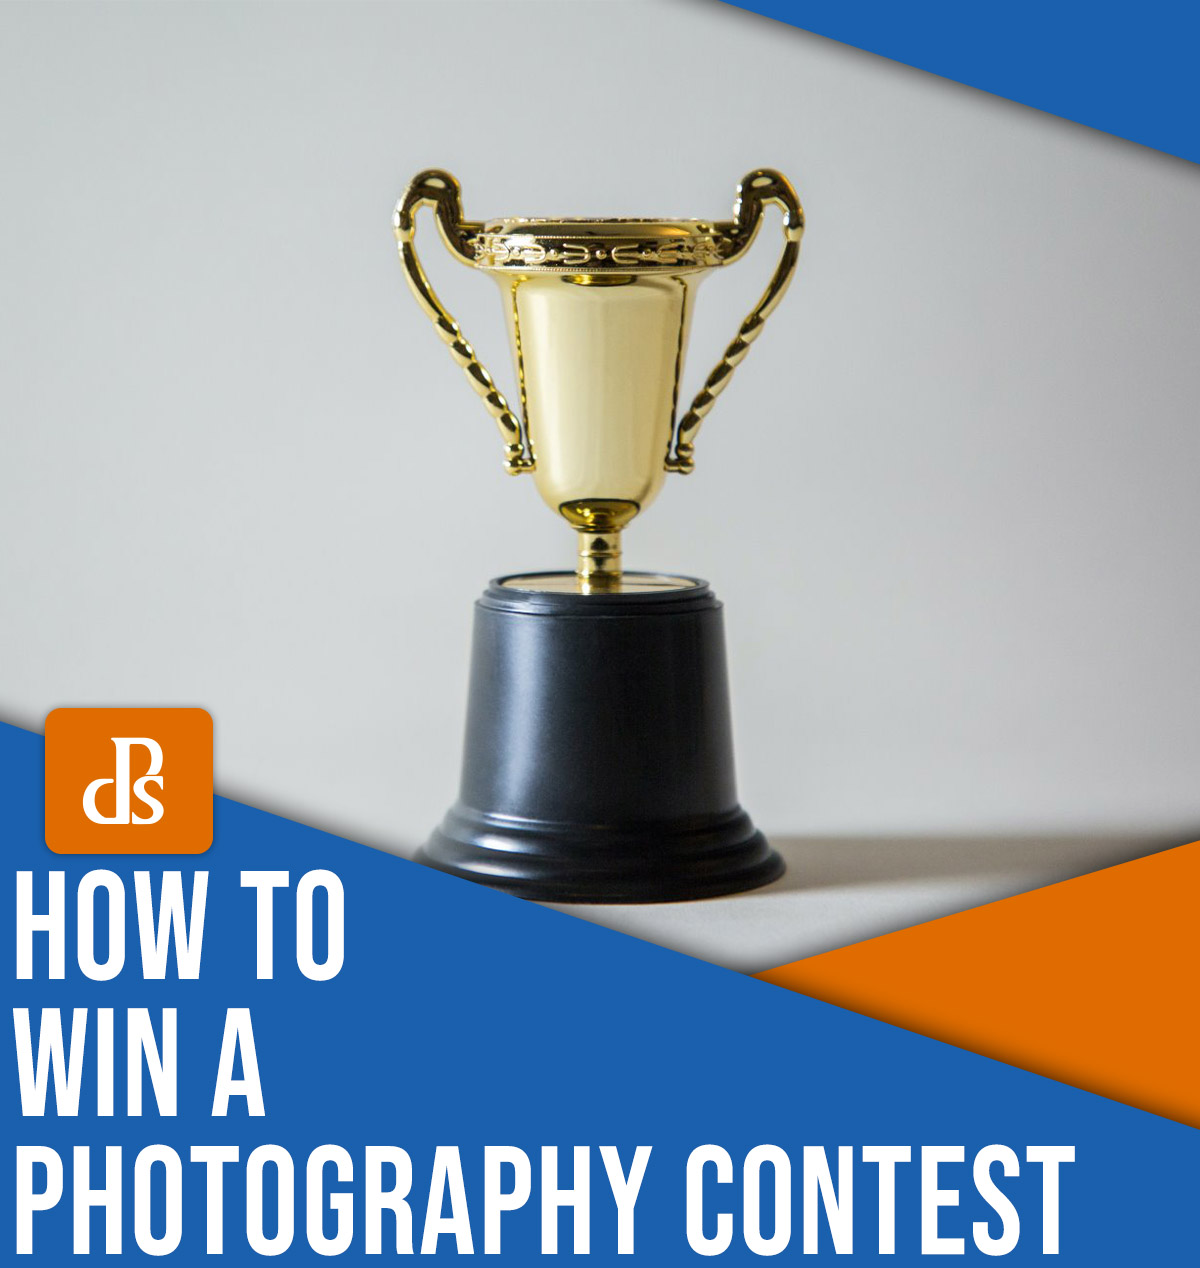 How to win a photography contest